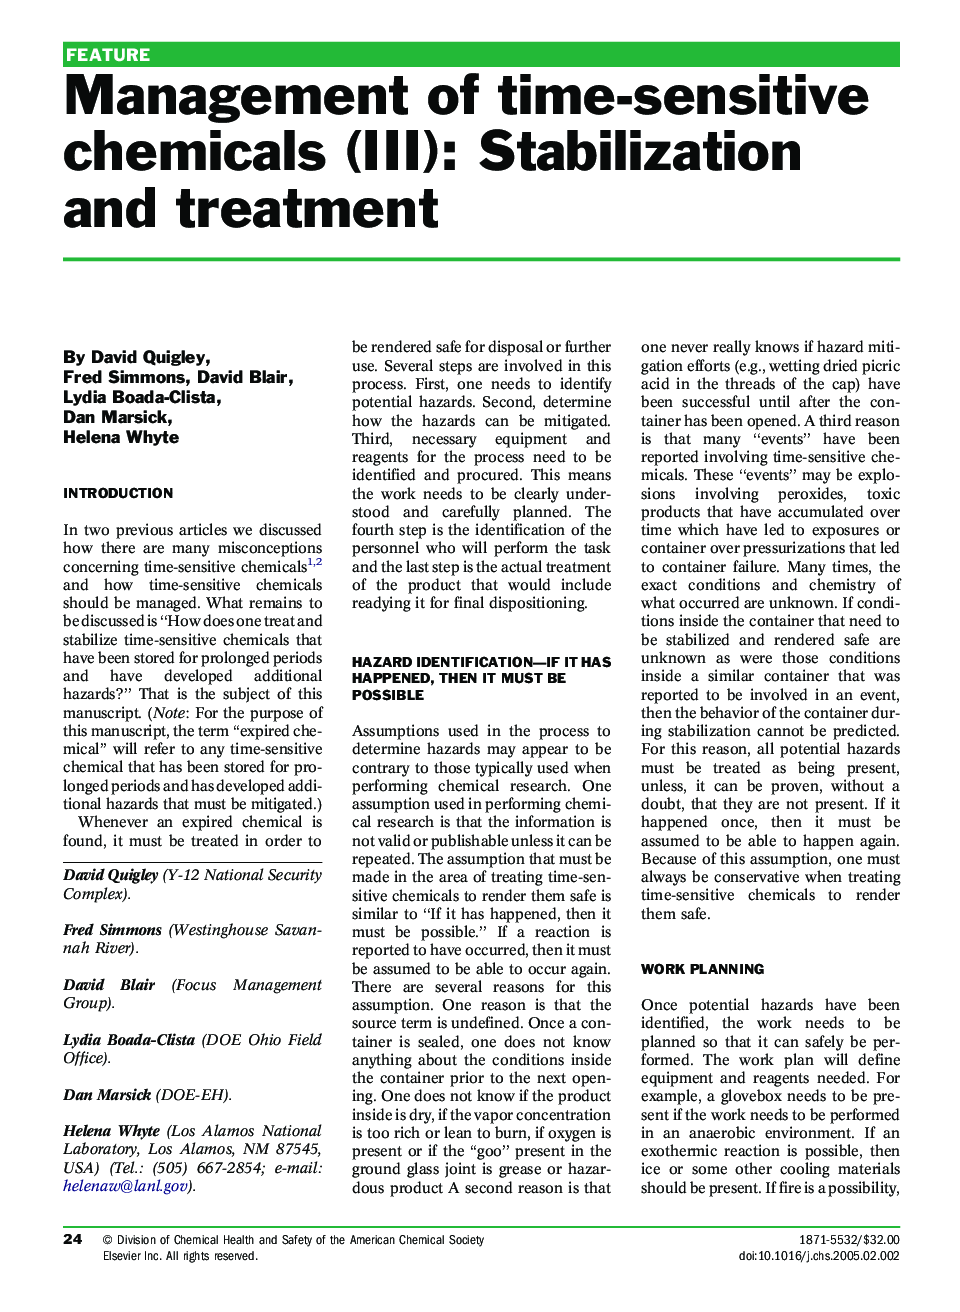 Management of time-sensitive chemicals (III): Stabilization and treatment